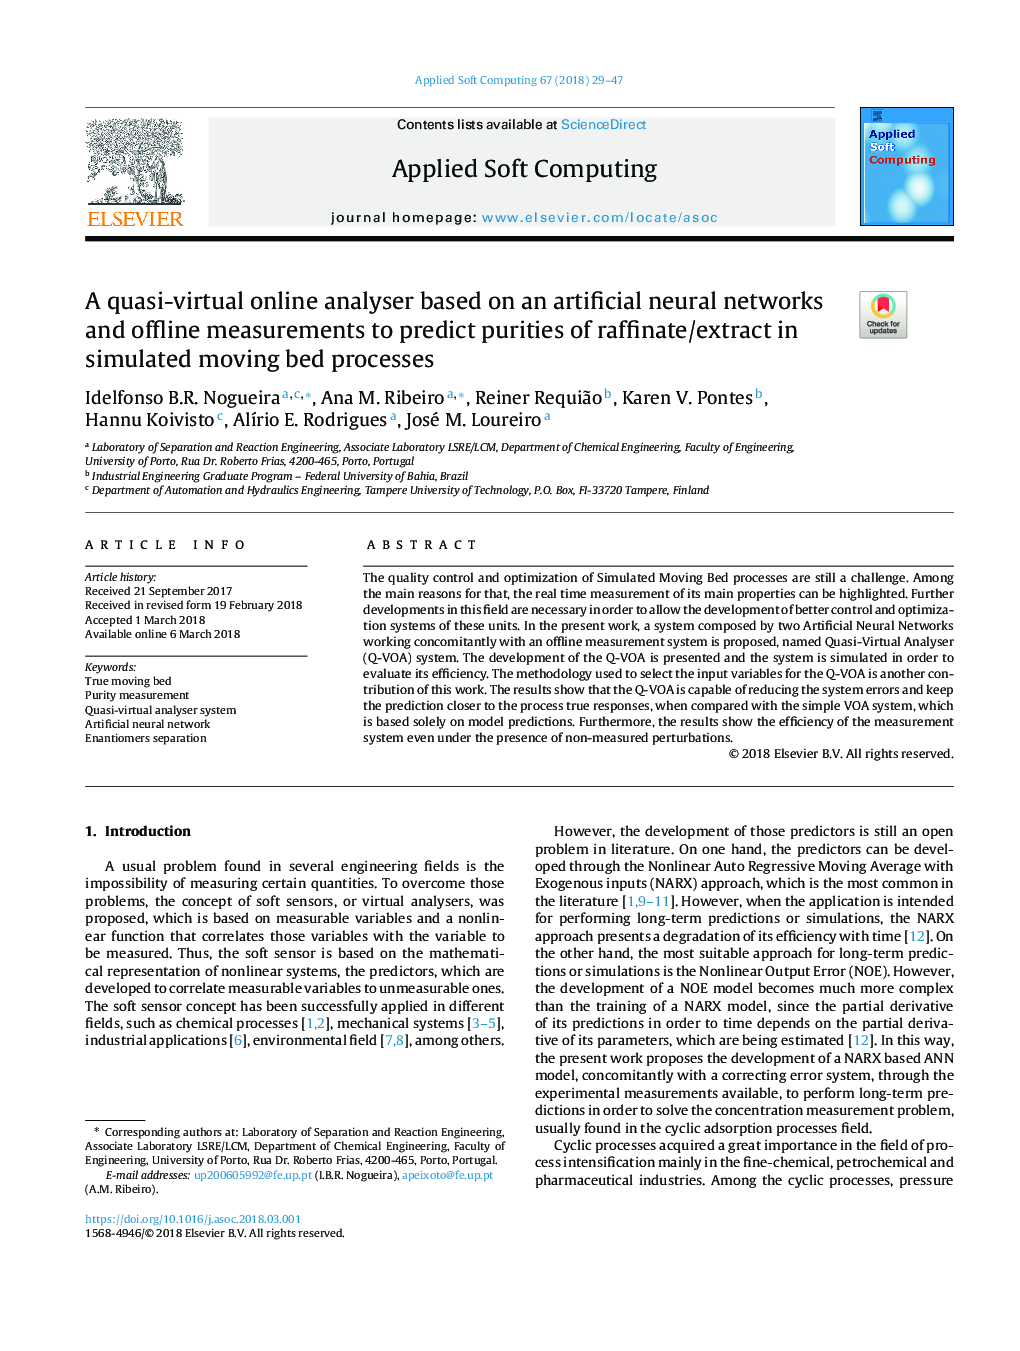 A quasi-virtual online analyser based on an artificial neural networks and offline measurements to predict purities of raffinate/extract in simulated moving bed processes